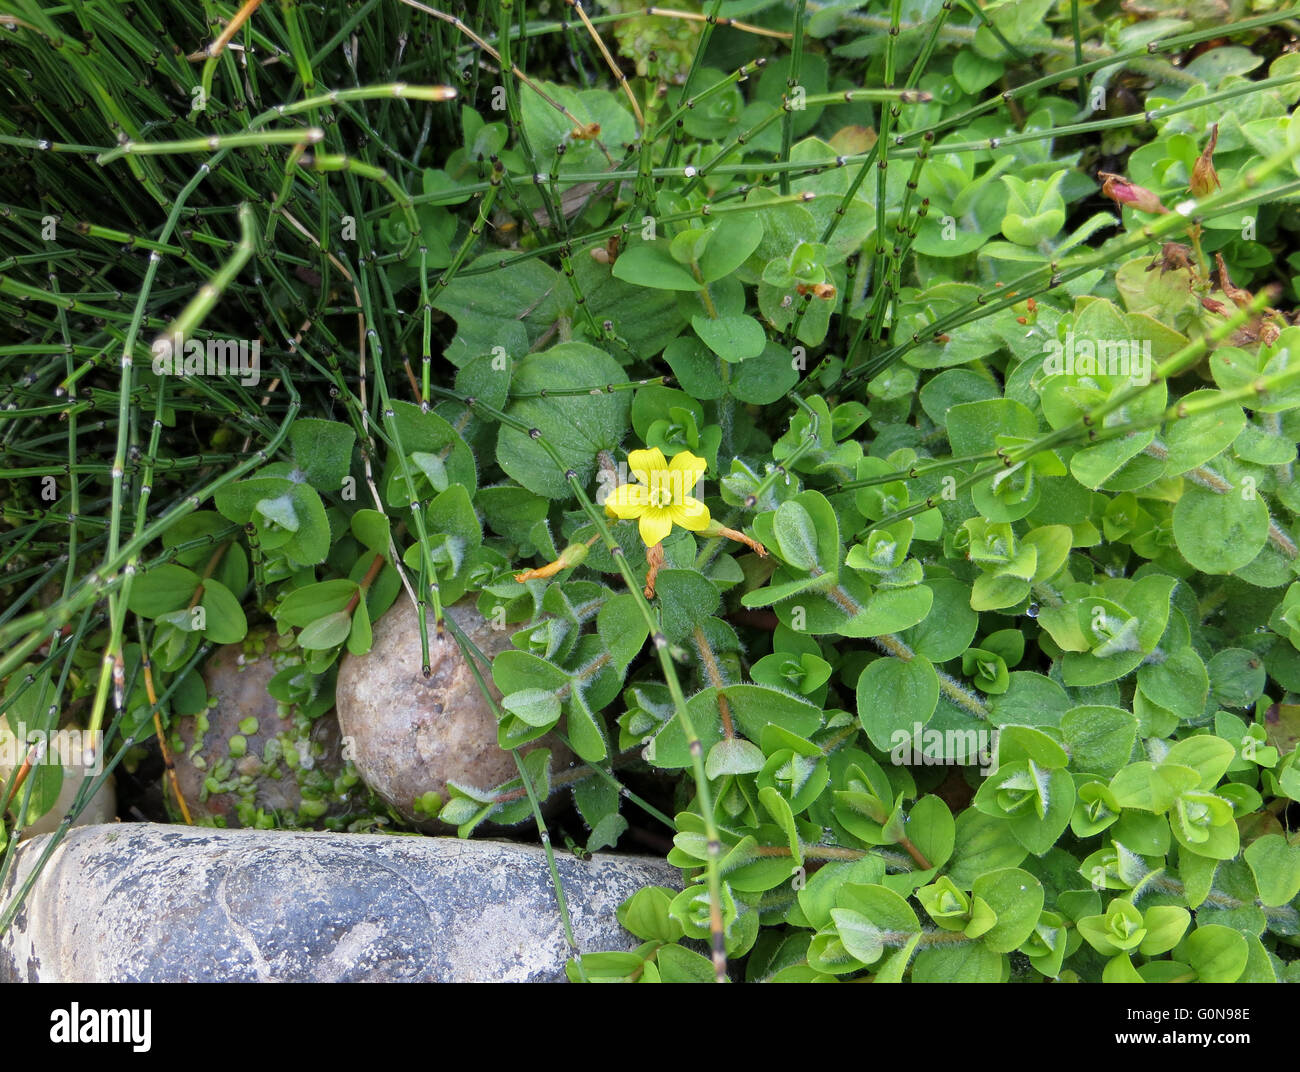 Creeping Jenny (Lysimachia nummularia) with single flower and horsetail (Equisetum) next to pebbles and rock Stock Photo